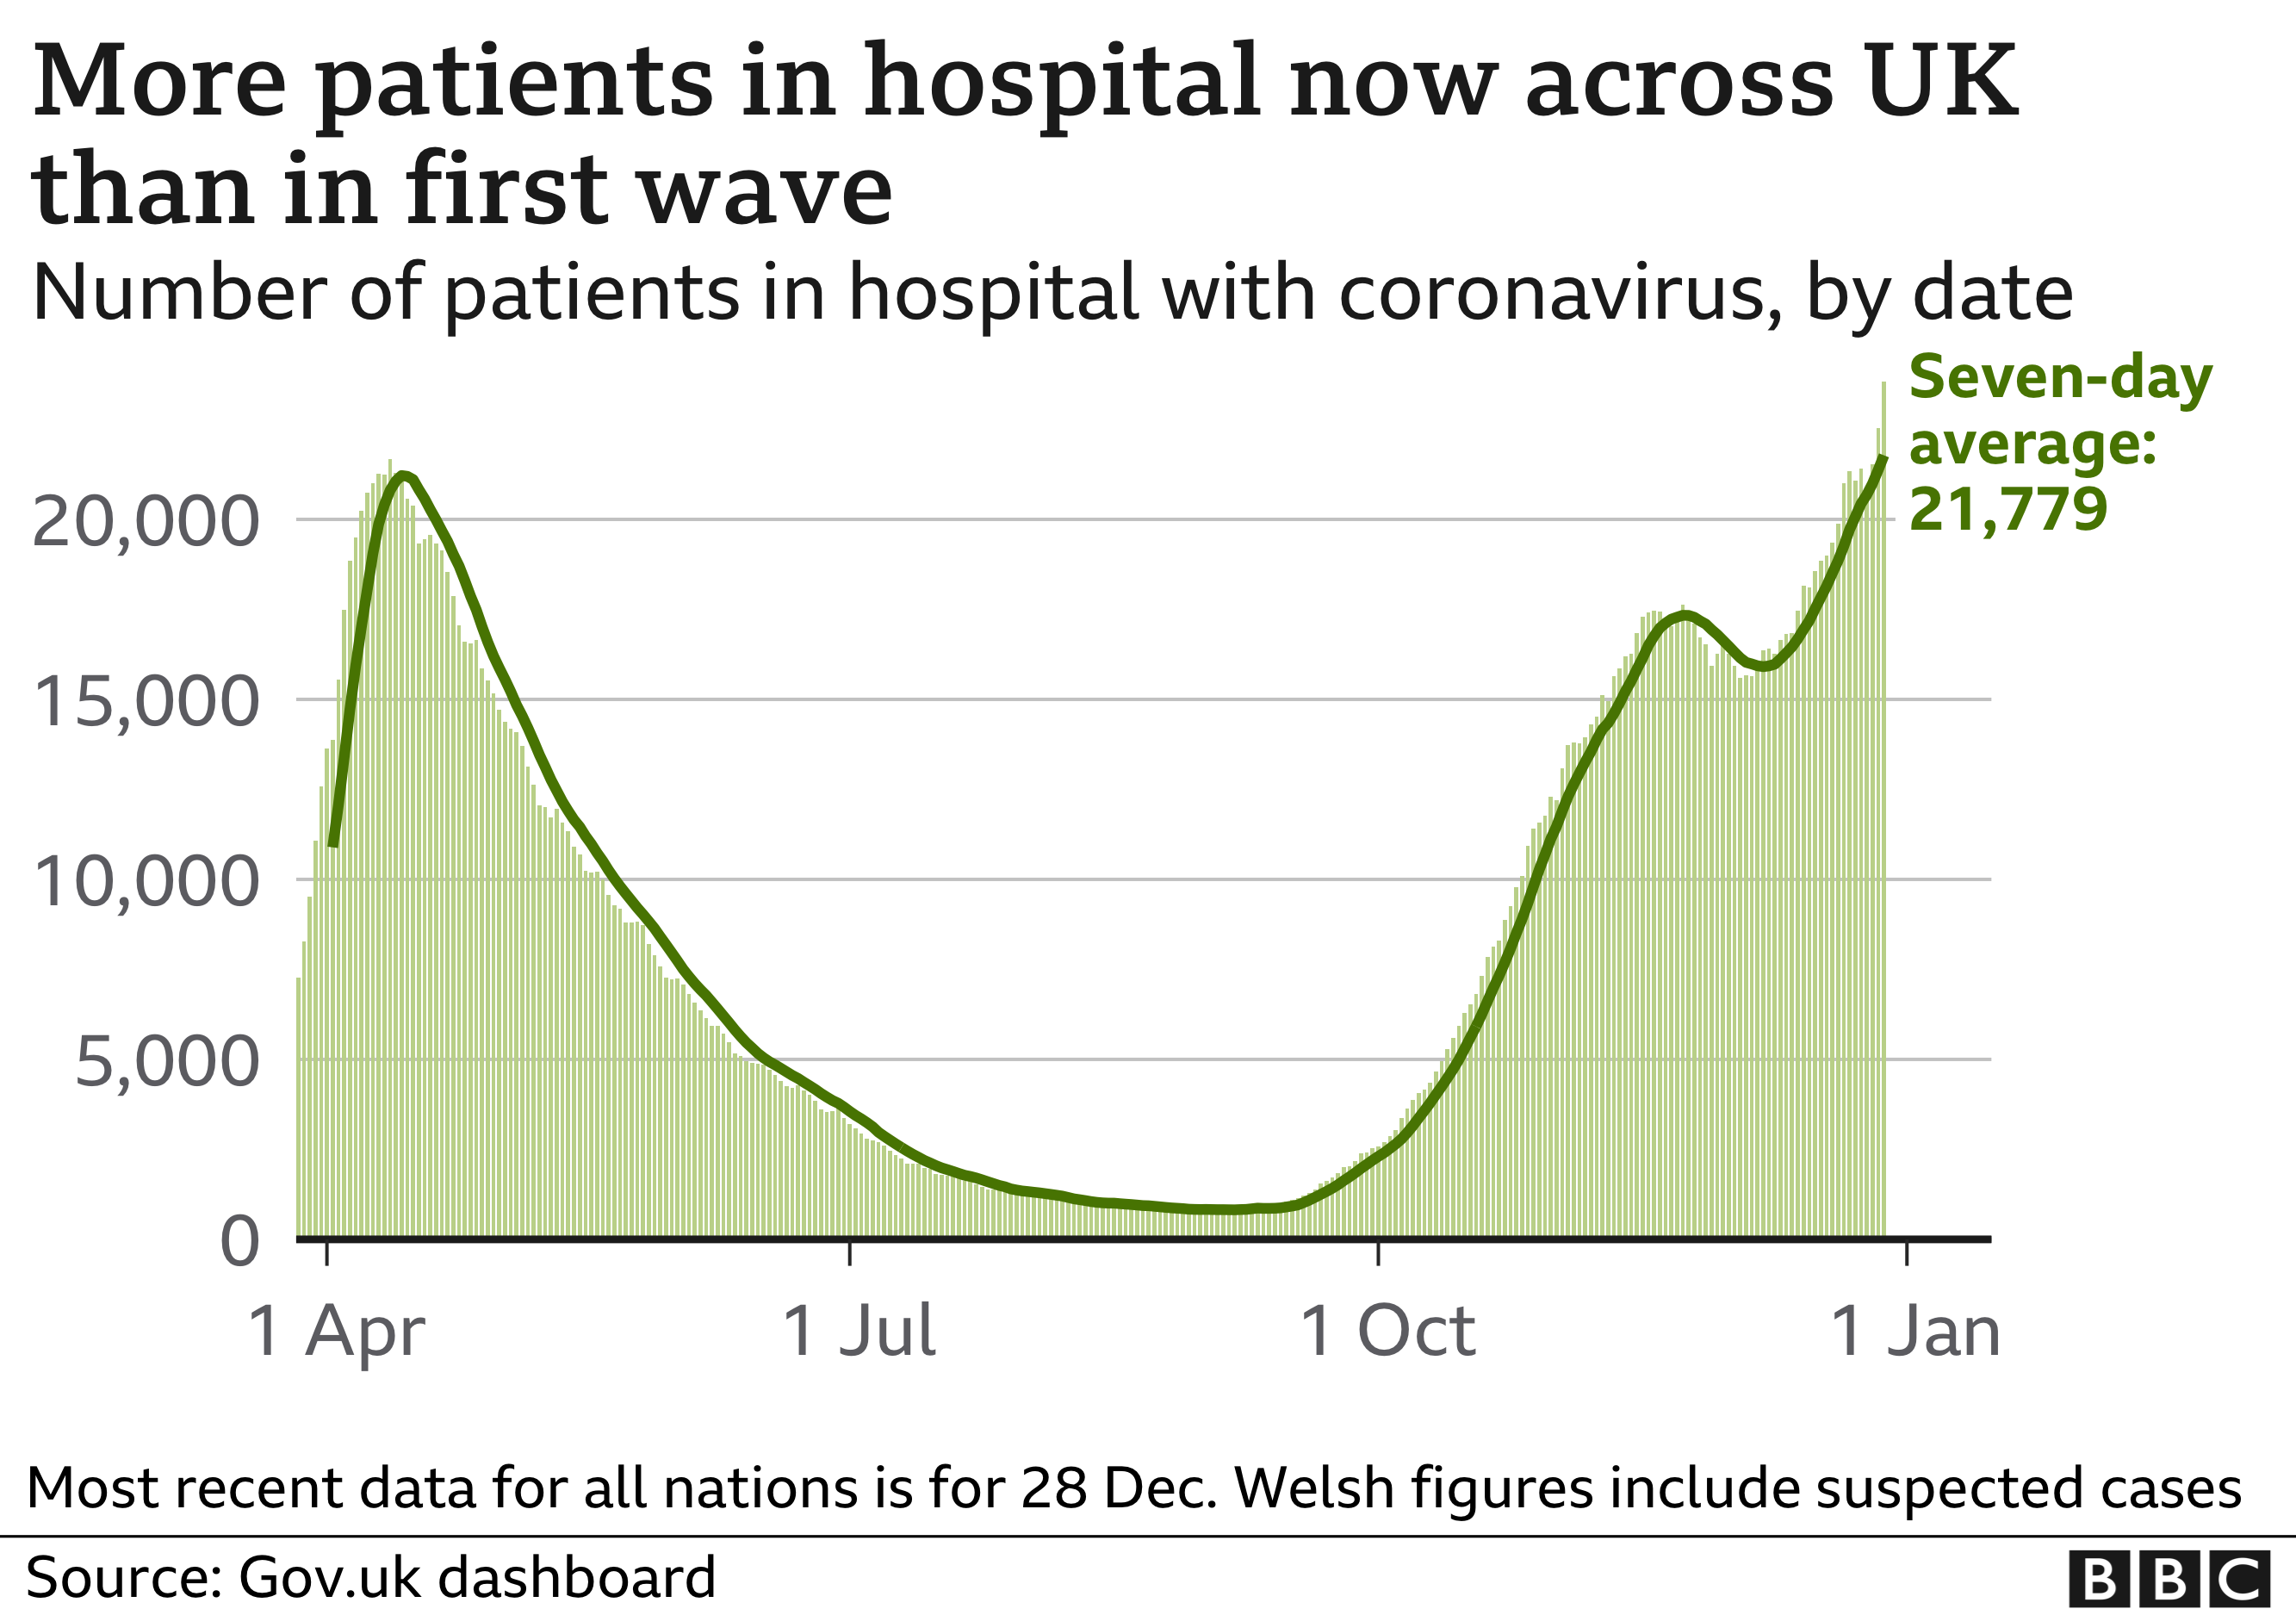 Chart showing the number of patients in hospitals with Covid-19 across the UK